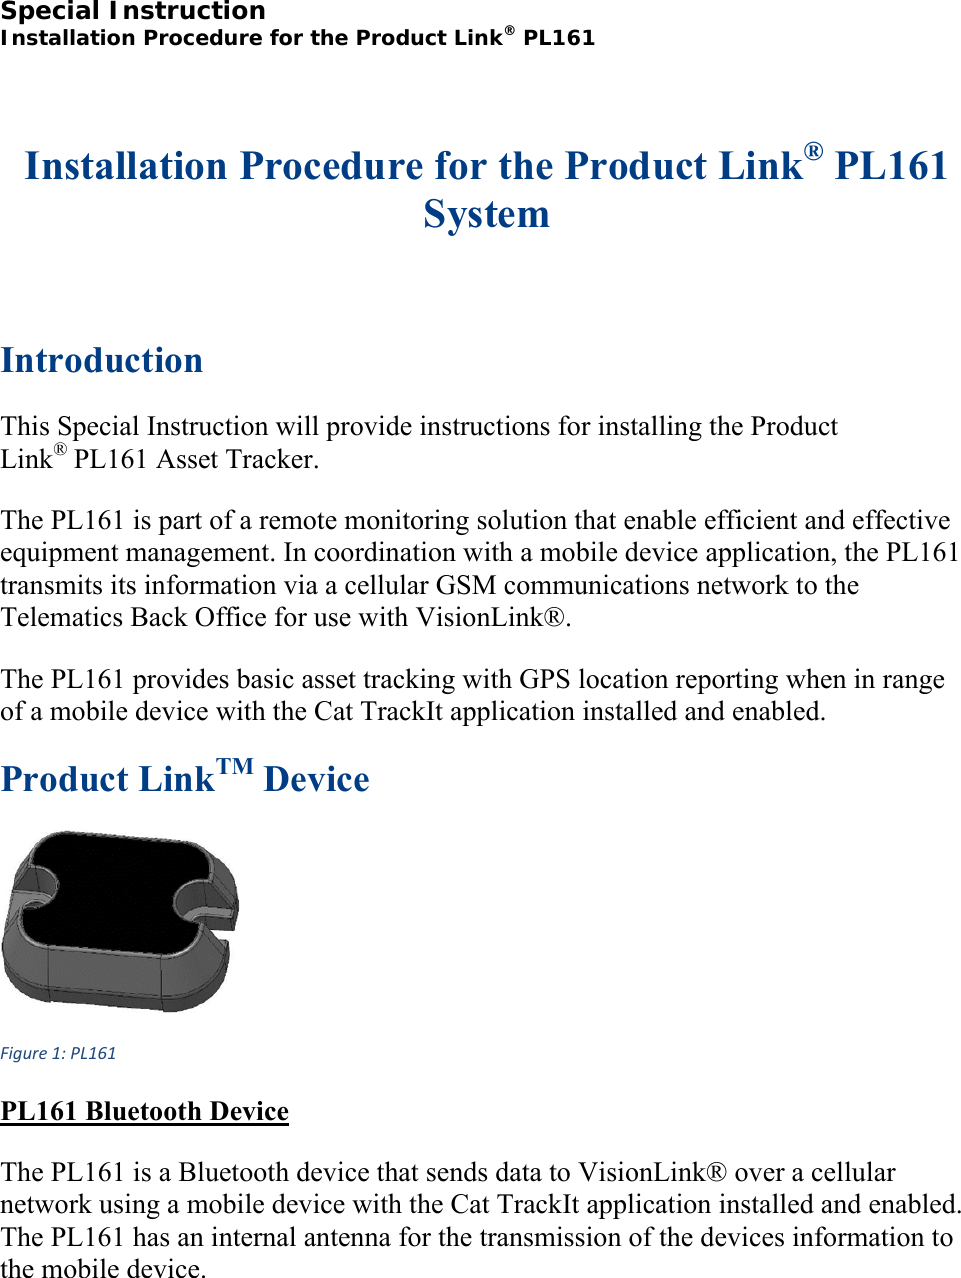 Special Instruction  Installation Procedure for the Product Link® PL161  Installation Procedure for the Product Link® PL161 System  Introduction This Special Instruction will provide instructions for installing the Product Link® PL161 Asset Tracker. The PL161 is part of a remote monitoring solution that enable efficient and effective equipment management. In coordination with a mobile device application, the PL161 transmits its information via a cellular GSM communications network to the Telematics Back Office for use with VisionLink®. The PL161 provides basic asset tracking with GPS location reporting when in range of a mobile device with the Cat TrackIt application installed and enabled. Product LinkTM Device Figure1:PL161 PL161 Bluetooth Device The PL161 is a Bluetooth device that sends data to VisionLink® over a cellular network using a mobile device with the Cat TrackIt application installed and enabled. The PL161 has an internal antenna for the transmission of the devices information to the mobile device. 